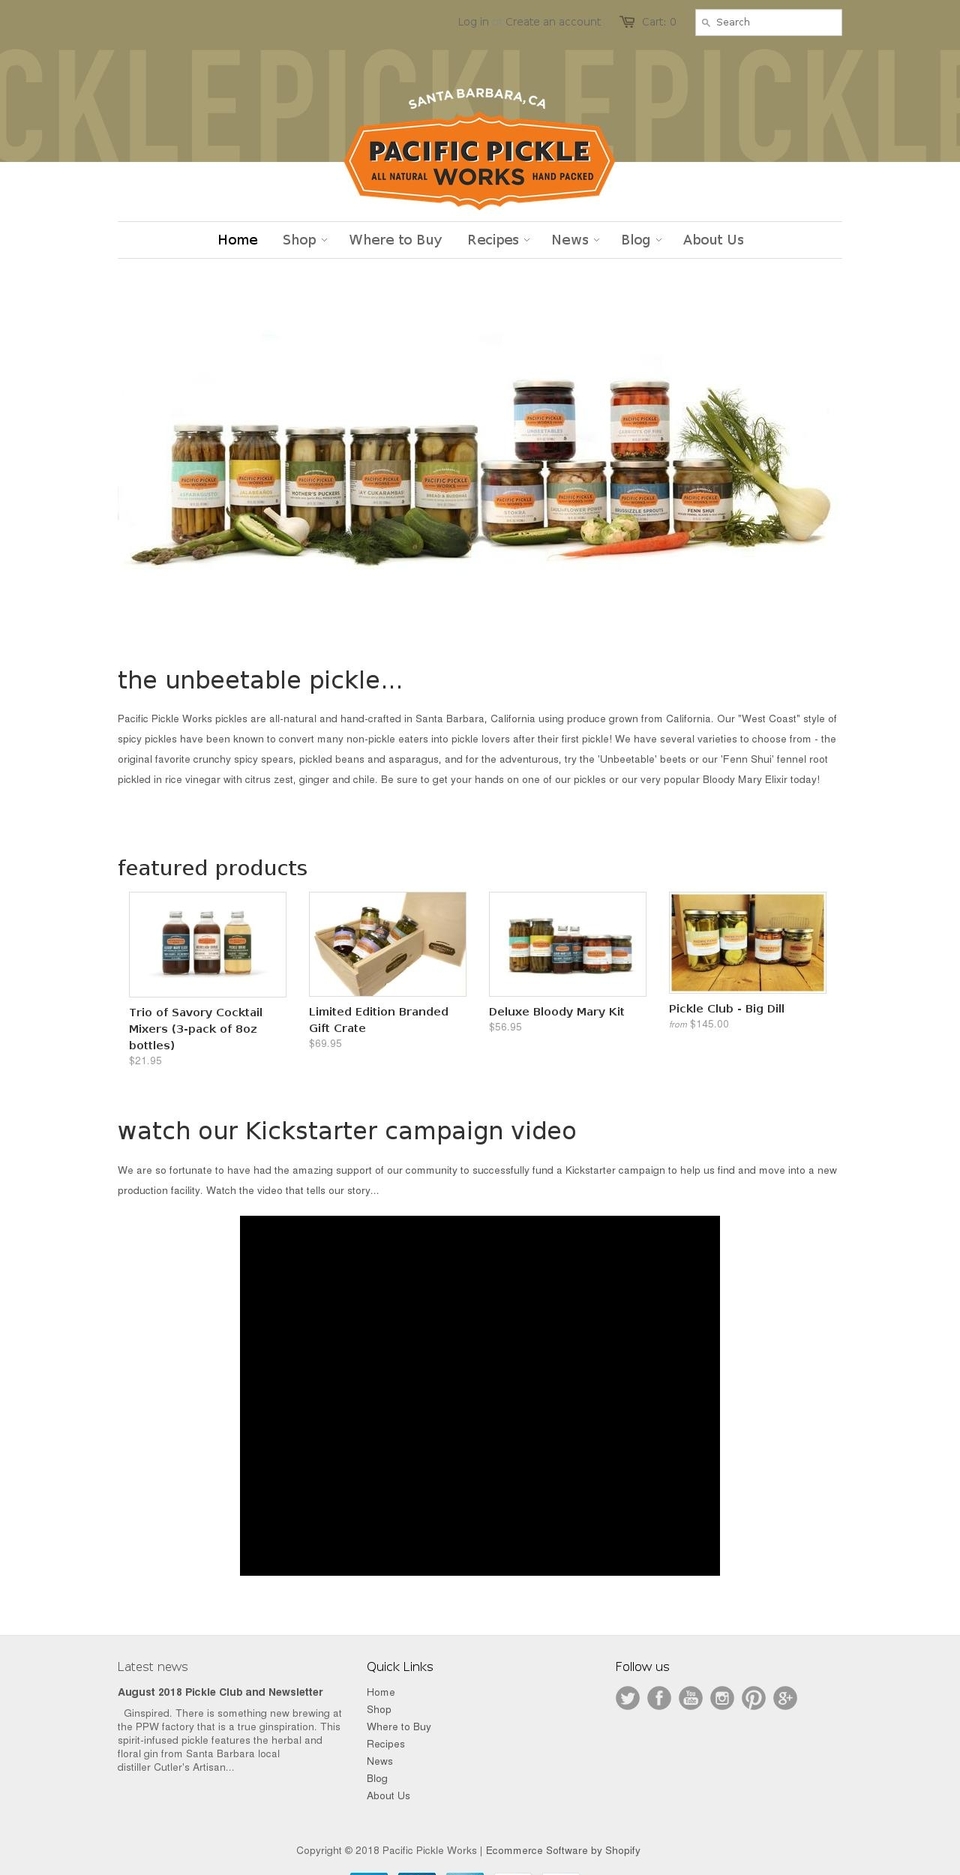 pacificpickle.works shopify website screenshot